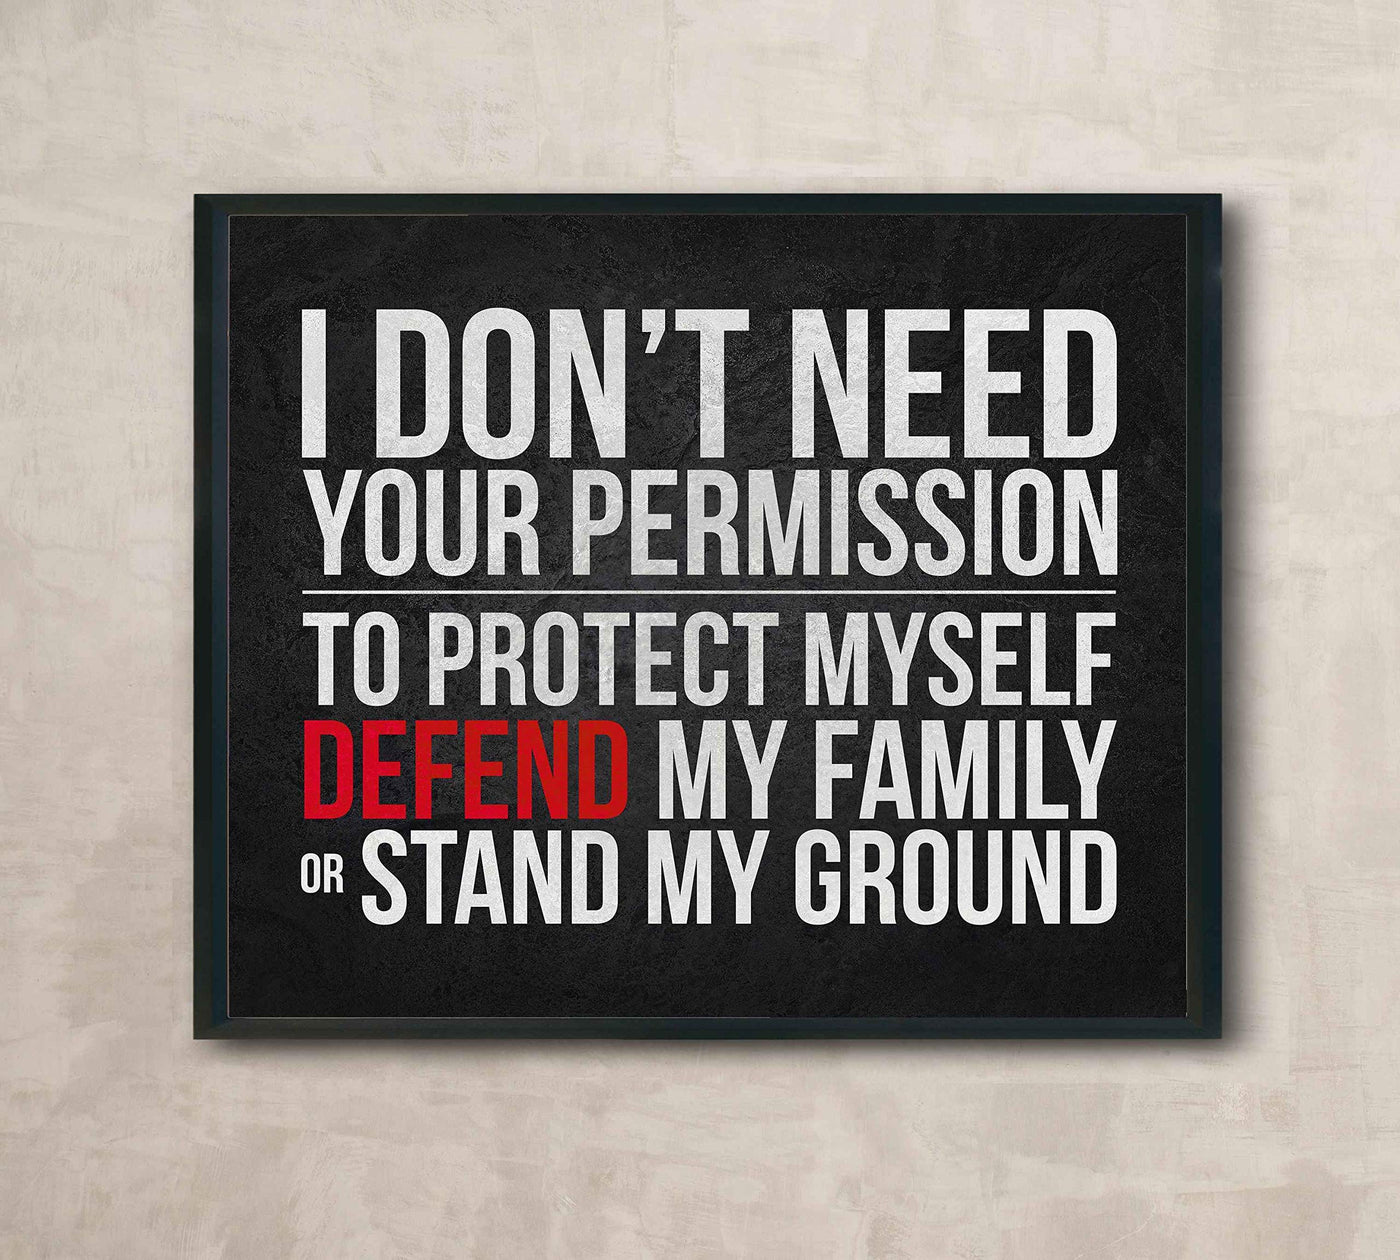 Don't Need Your Permission to Defend My Family-10 x 8" Patriotic Wall Art Sign-Ready to Frame. Pro-Constitutional Poster Print. Perfect Decor for Home-Office-Garage-Gun Shop. Great Gift for All!